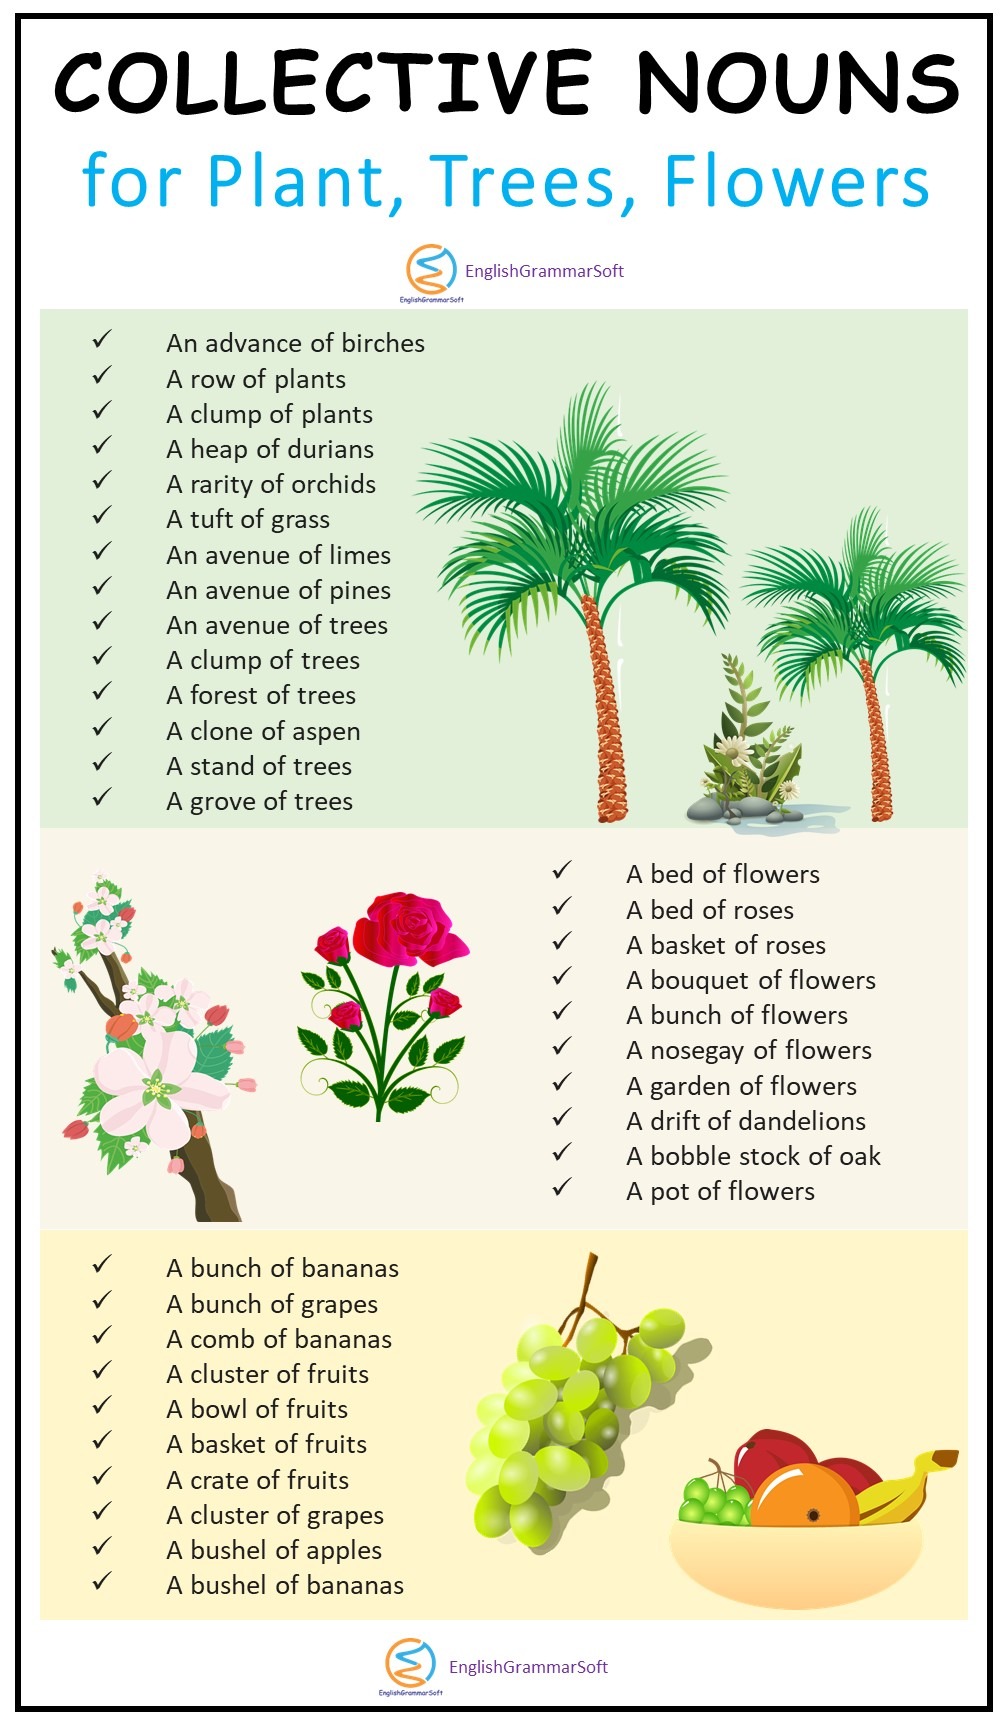 Collective Nouns for Plants and Trees